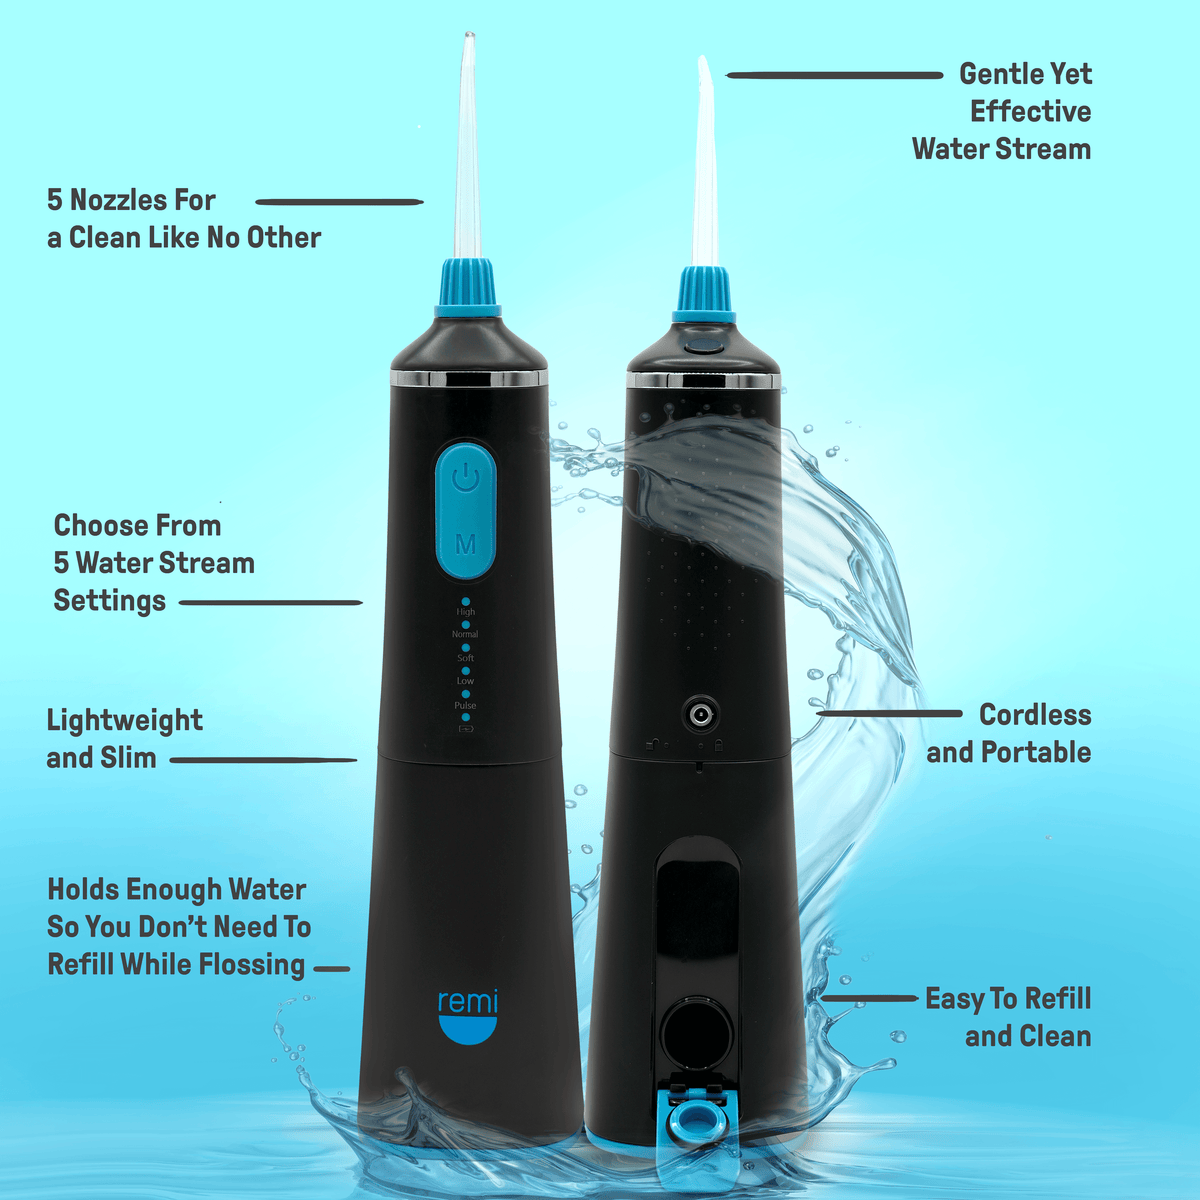 Two Cordless Water Flossers are shown in the water.